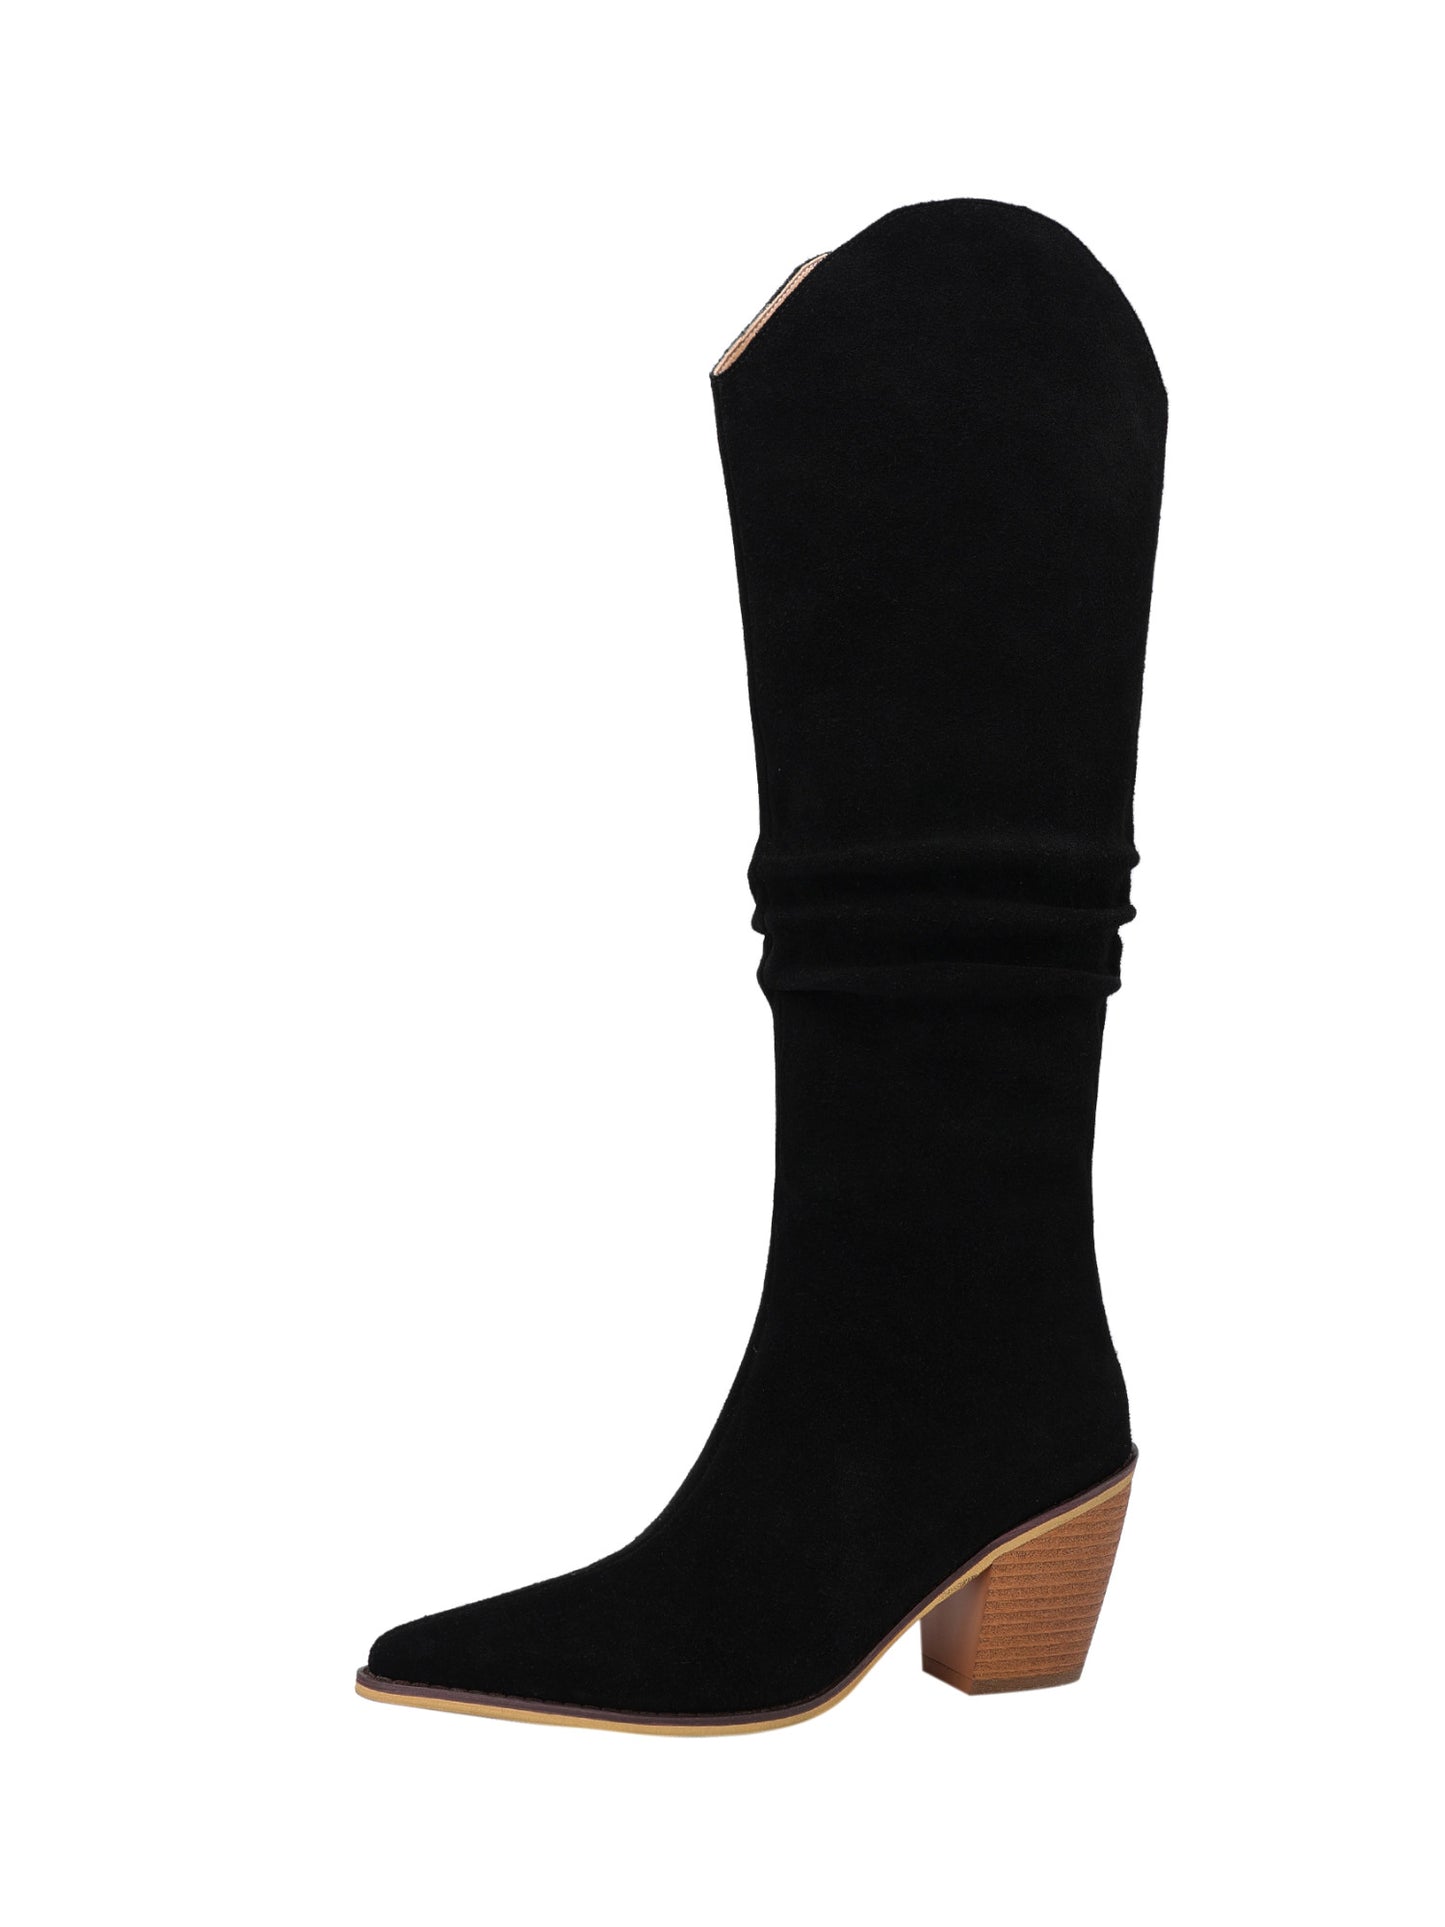 Pene-Knee-high-Slouchy-Boots-Black-Suede